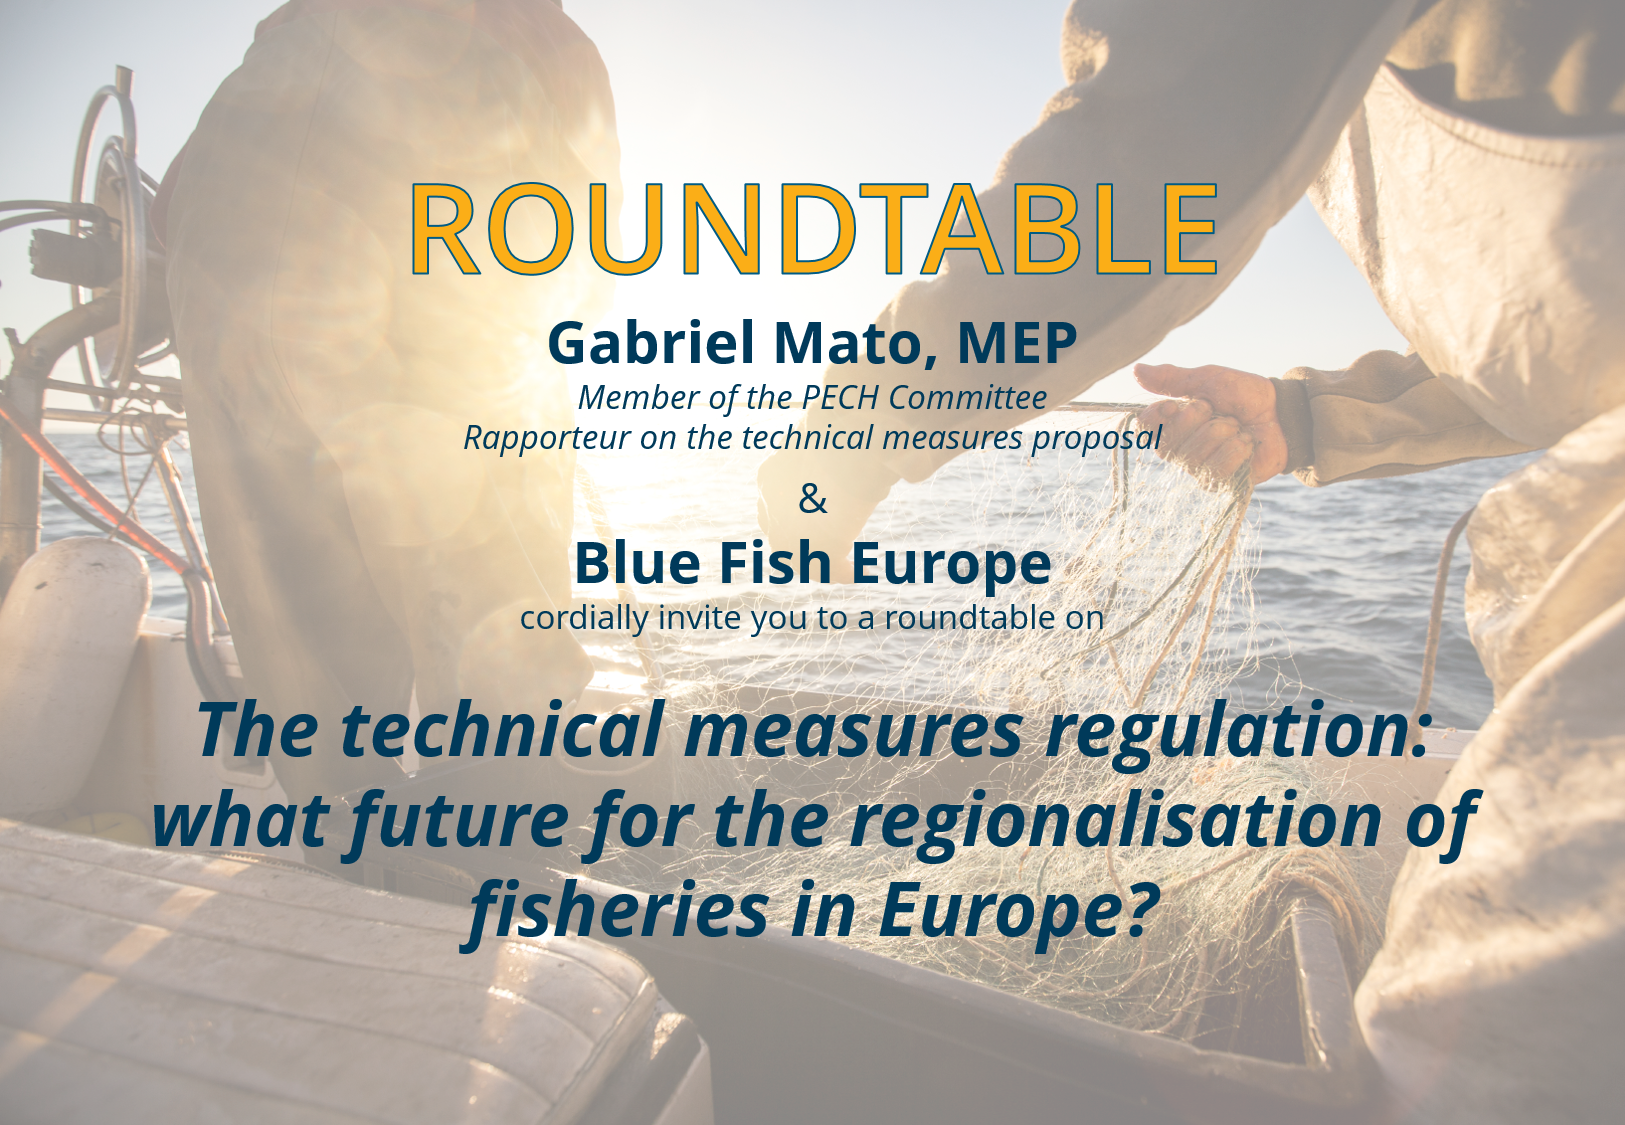 Technical measures regulation: what future for the regionalization of fisheries in Europe?